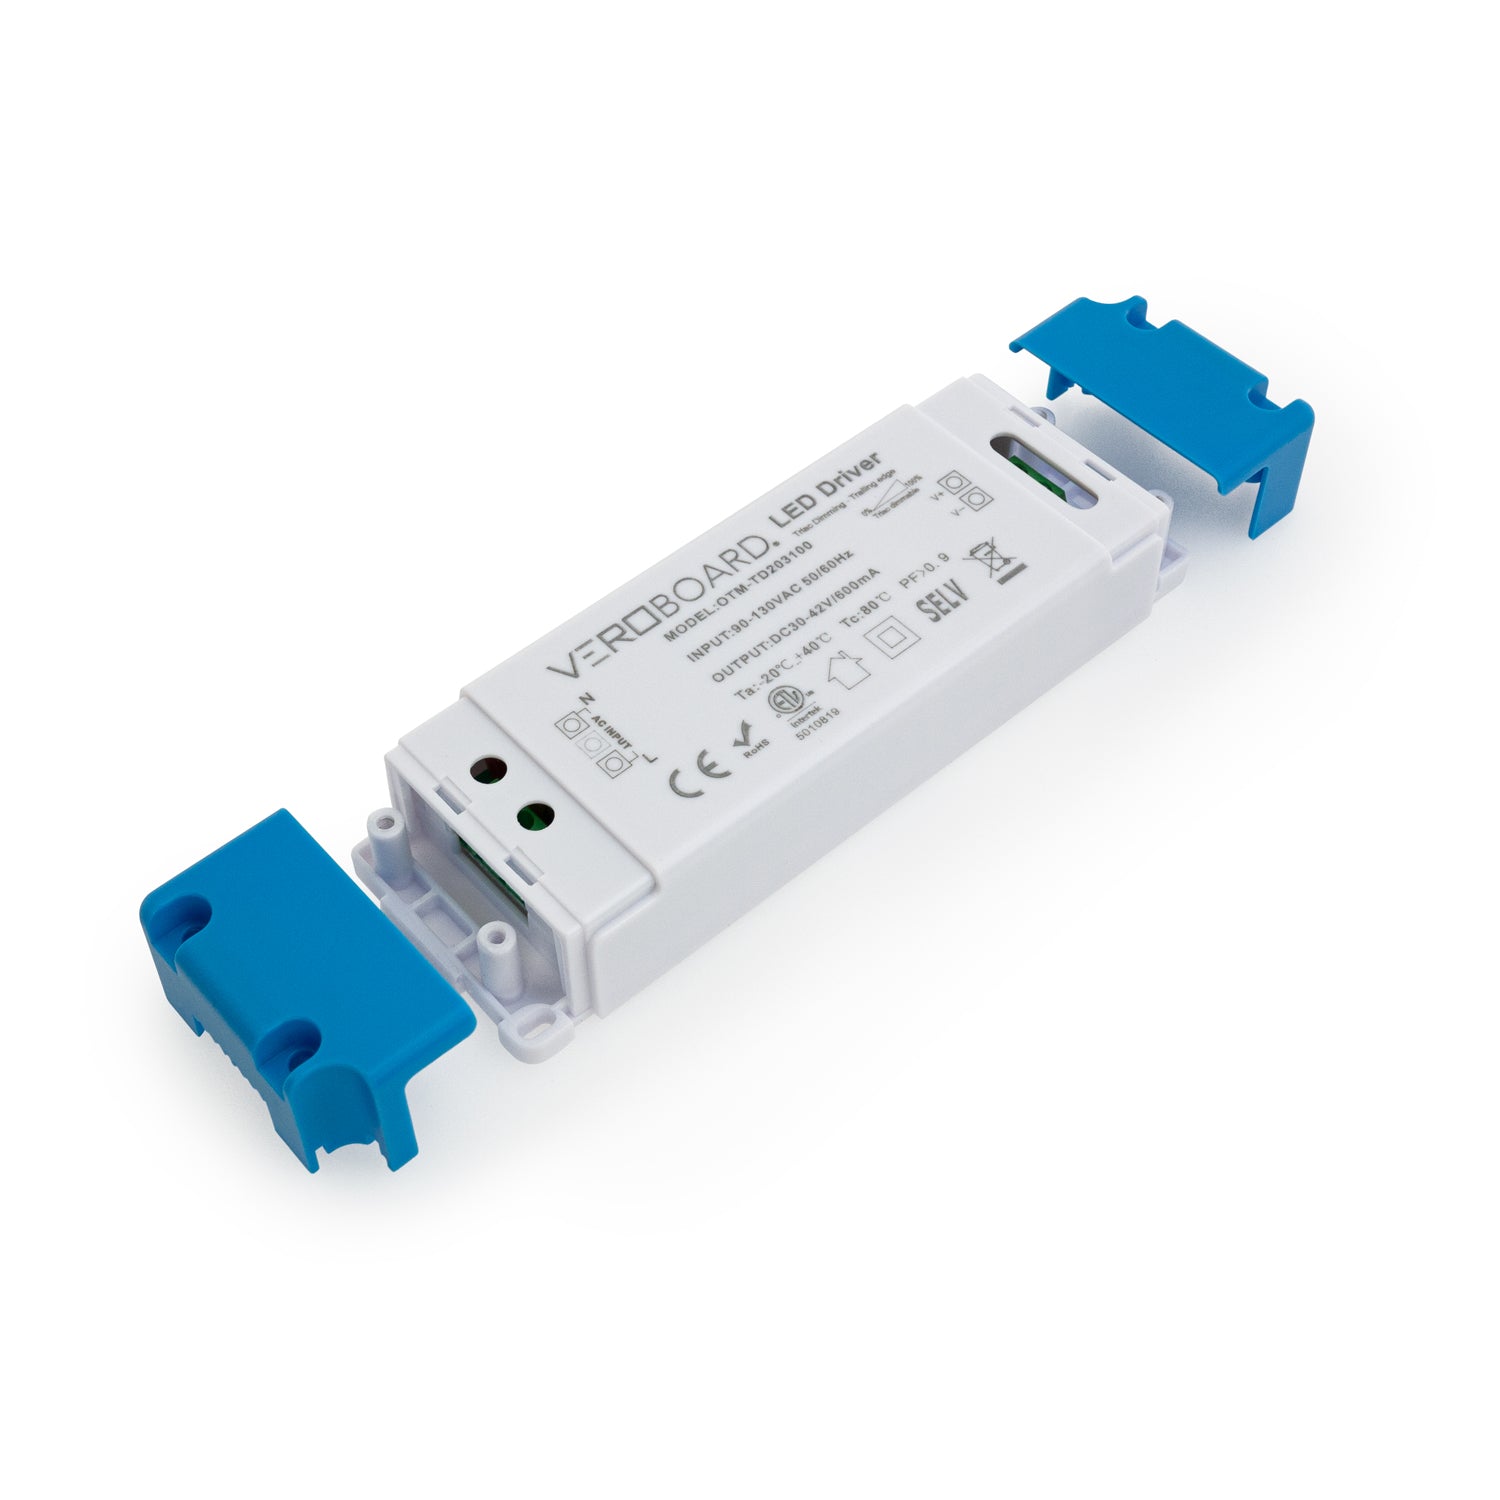 Driver proyecto led 30W 900mA 22-43V PF0.6 IP65